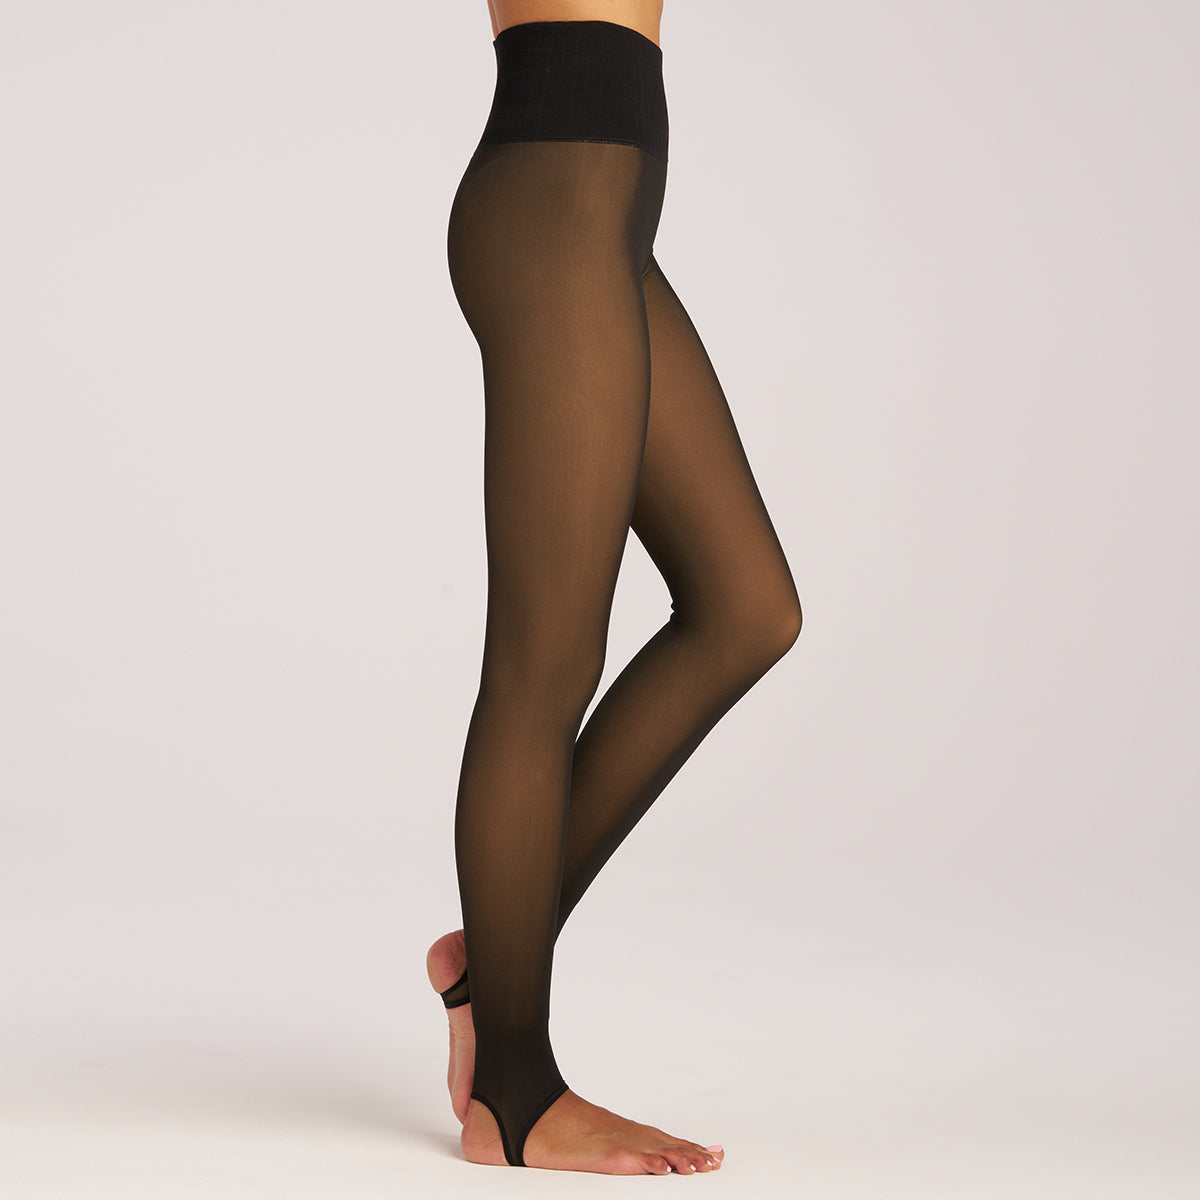 sanfly fish Thick Fleece Lined Tights Women Translucent Leggings